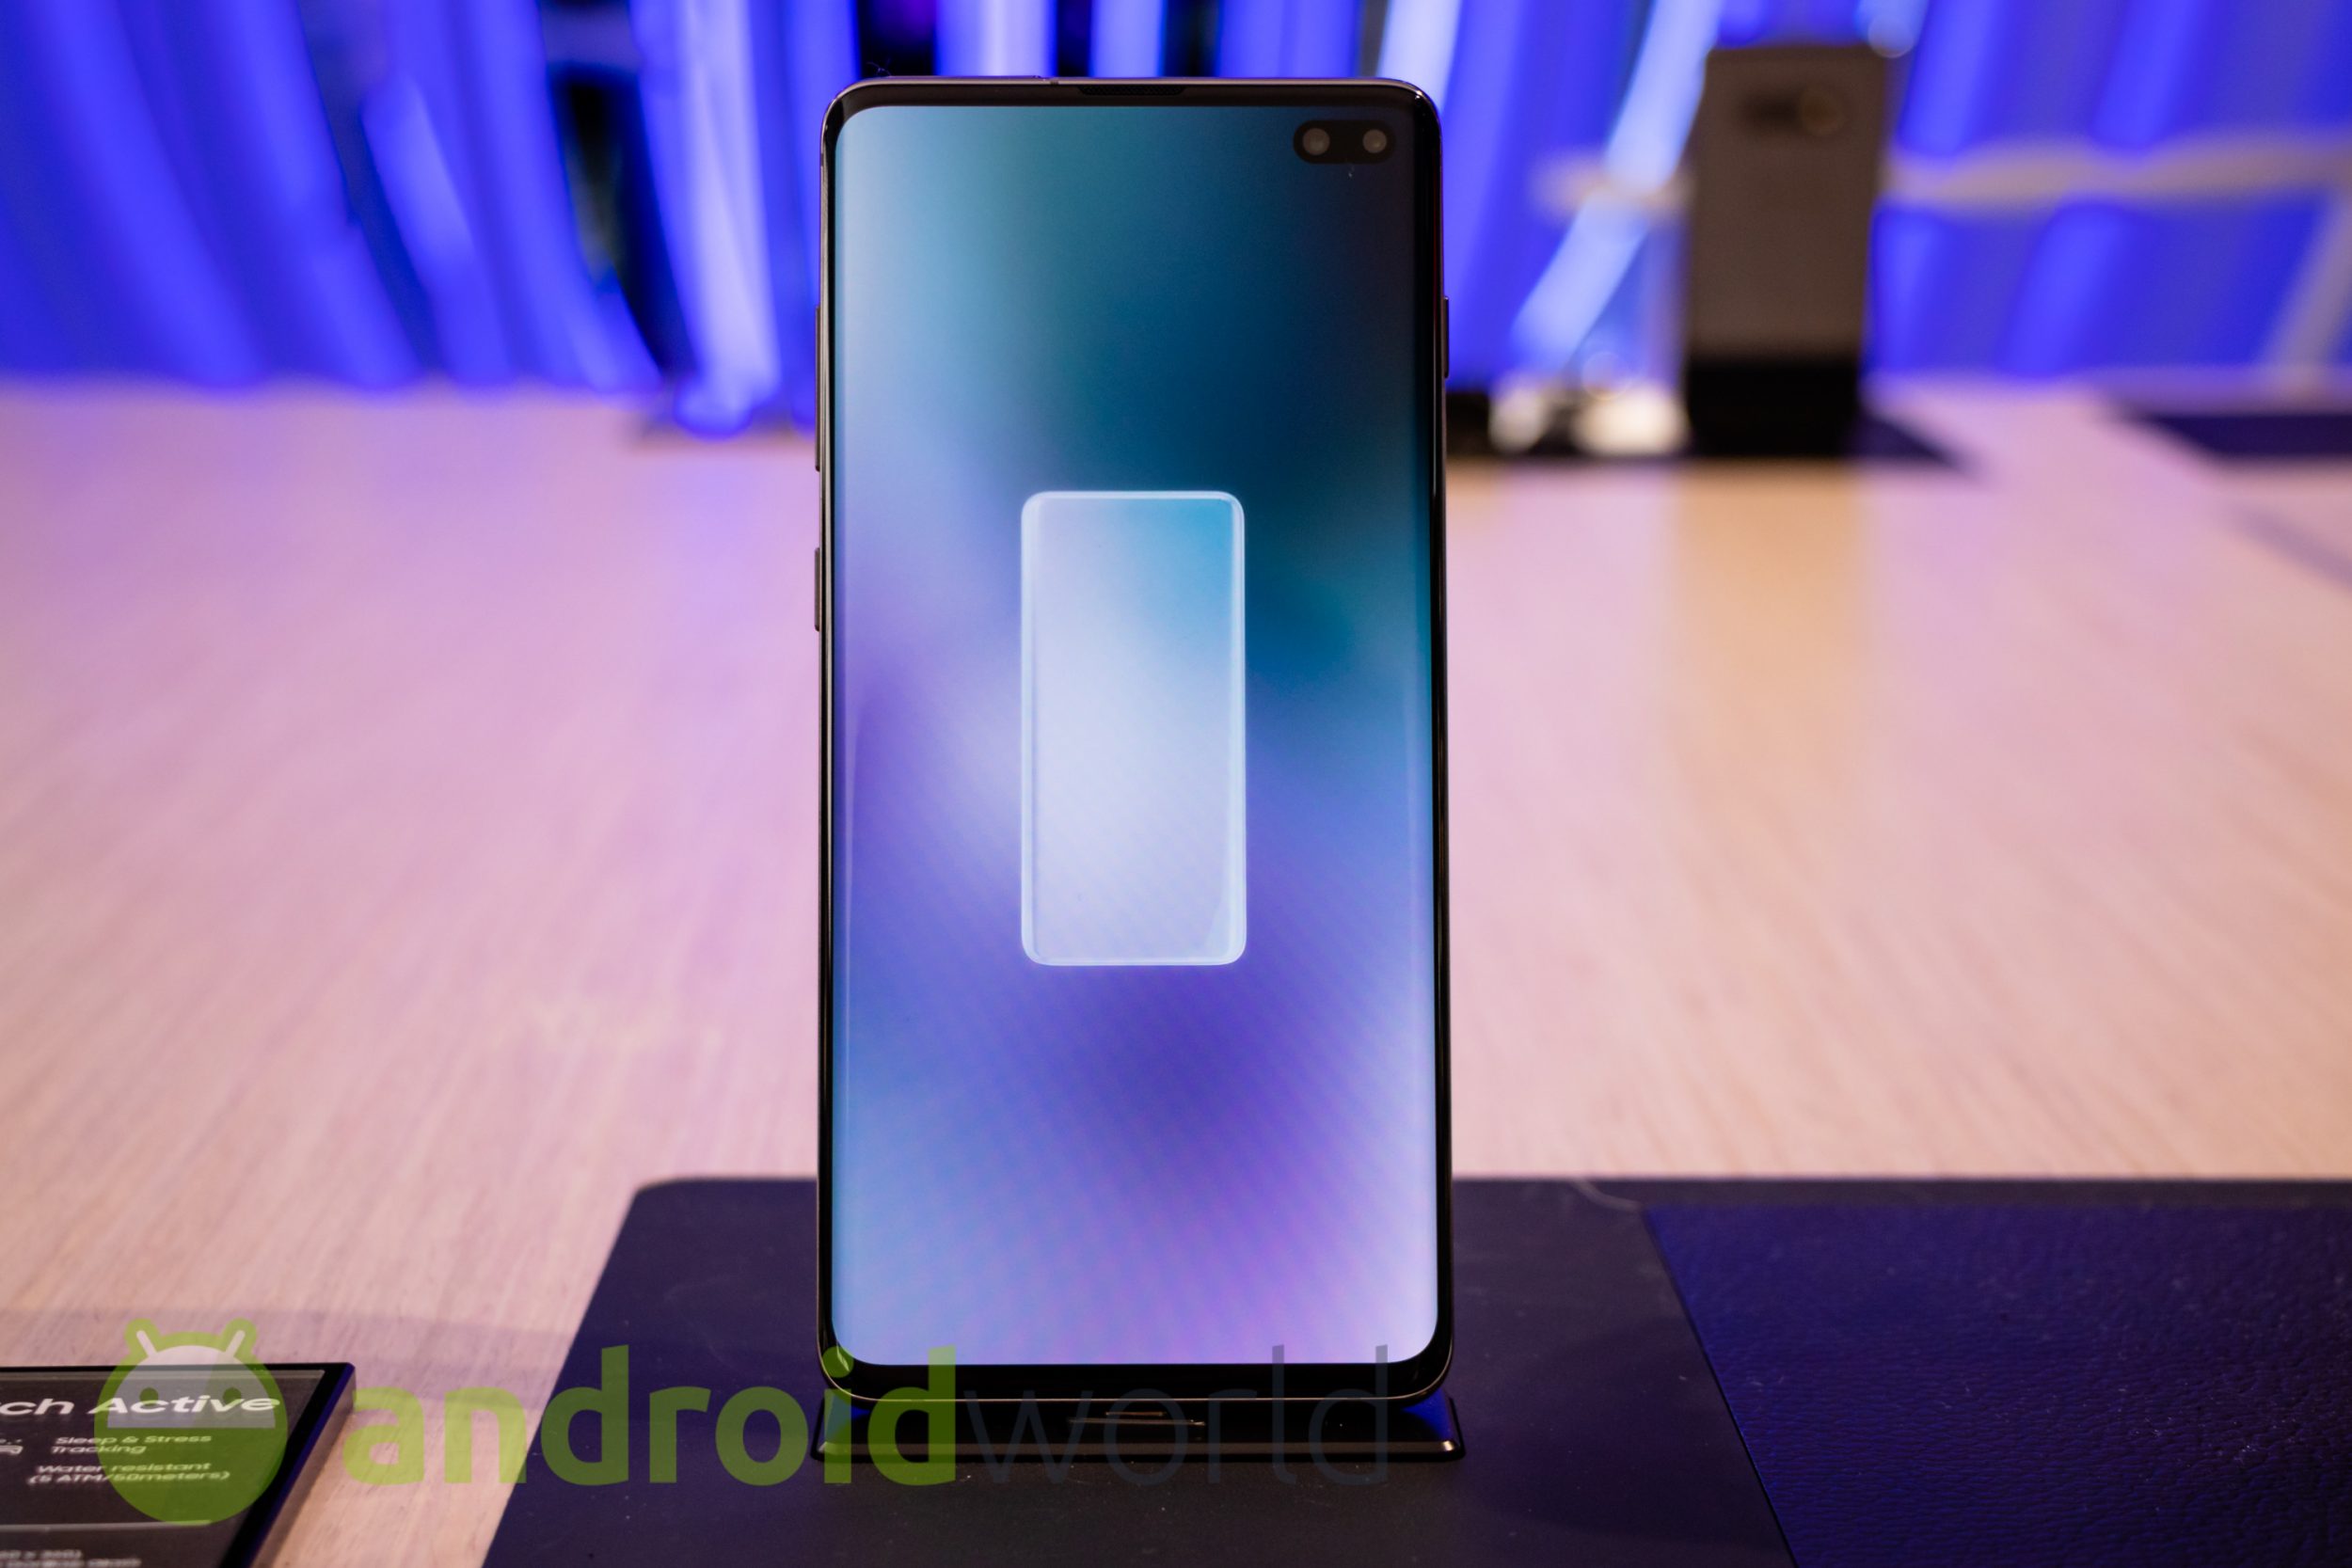 https://www.androidworld.it/wp-content/uploads/2019/03/samsung-galaxy-s10-plus-final-MWC-2019-2500x1667.jpg